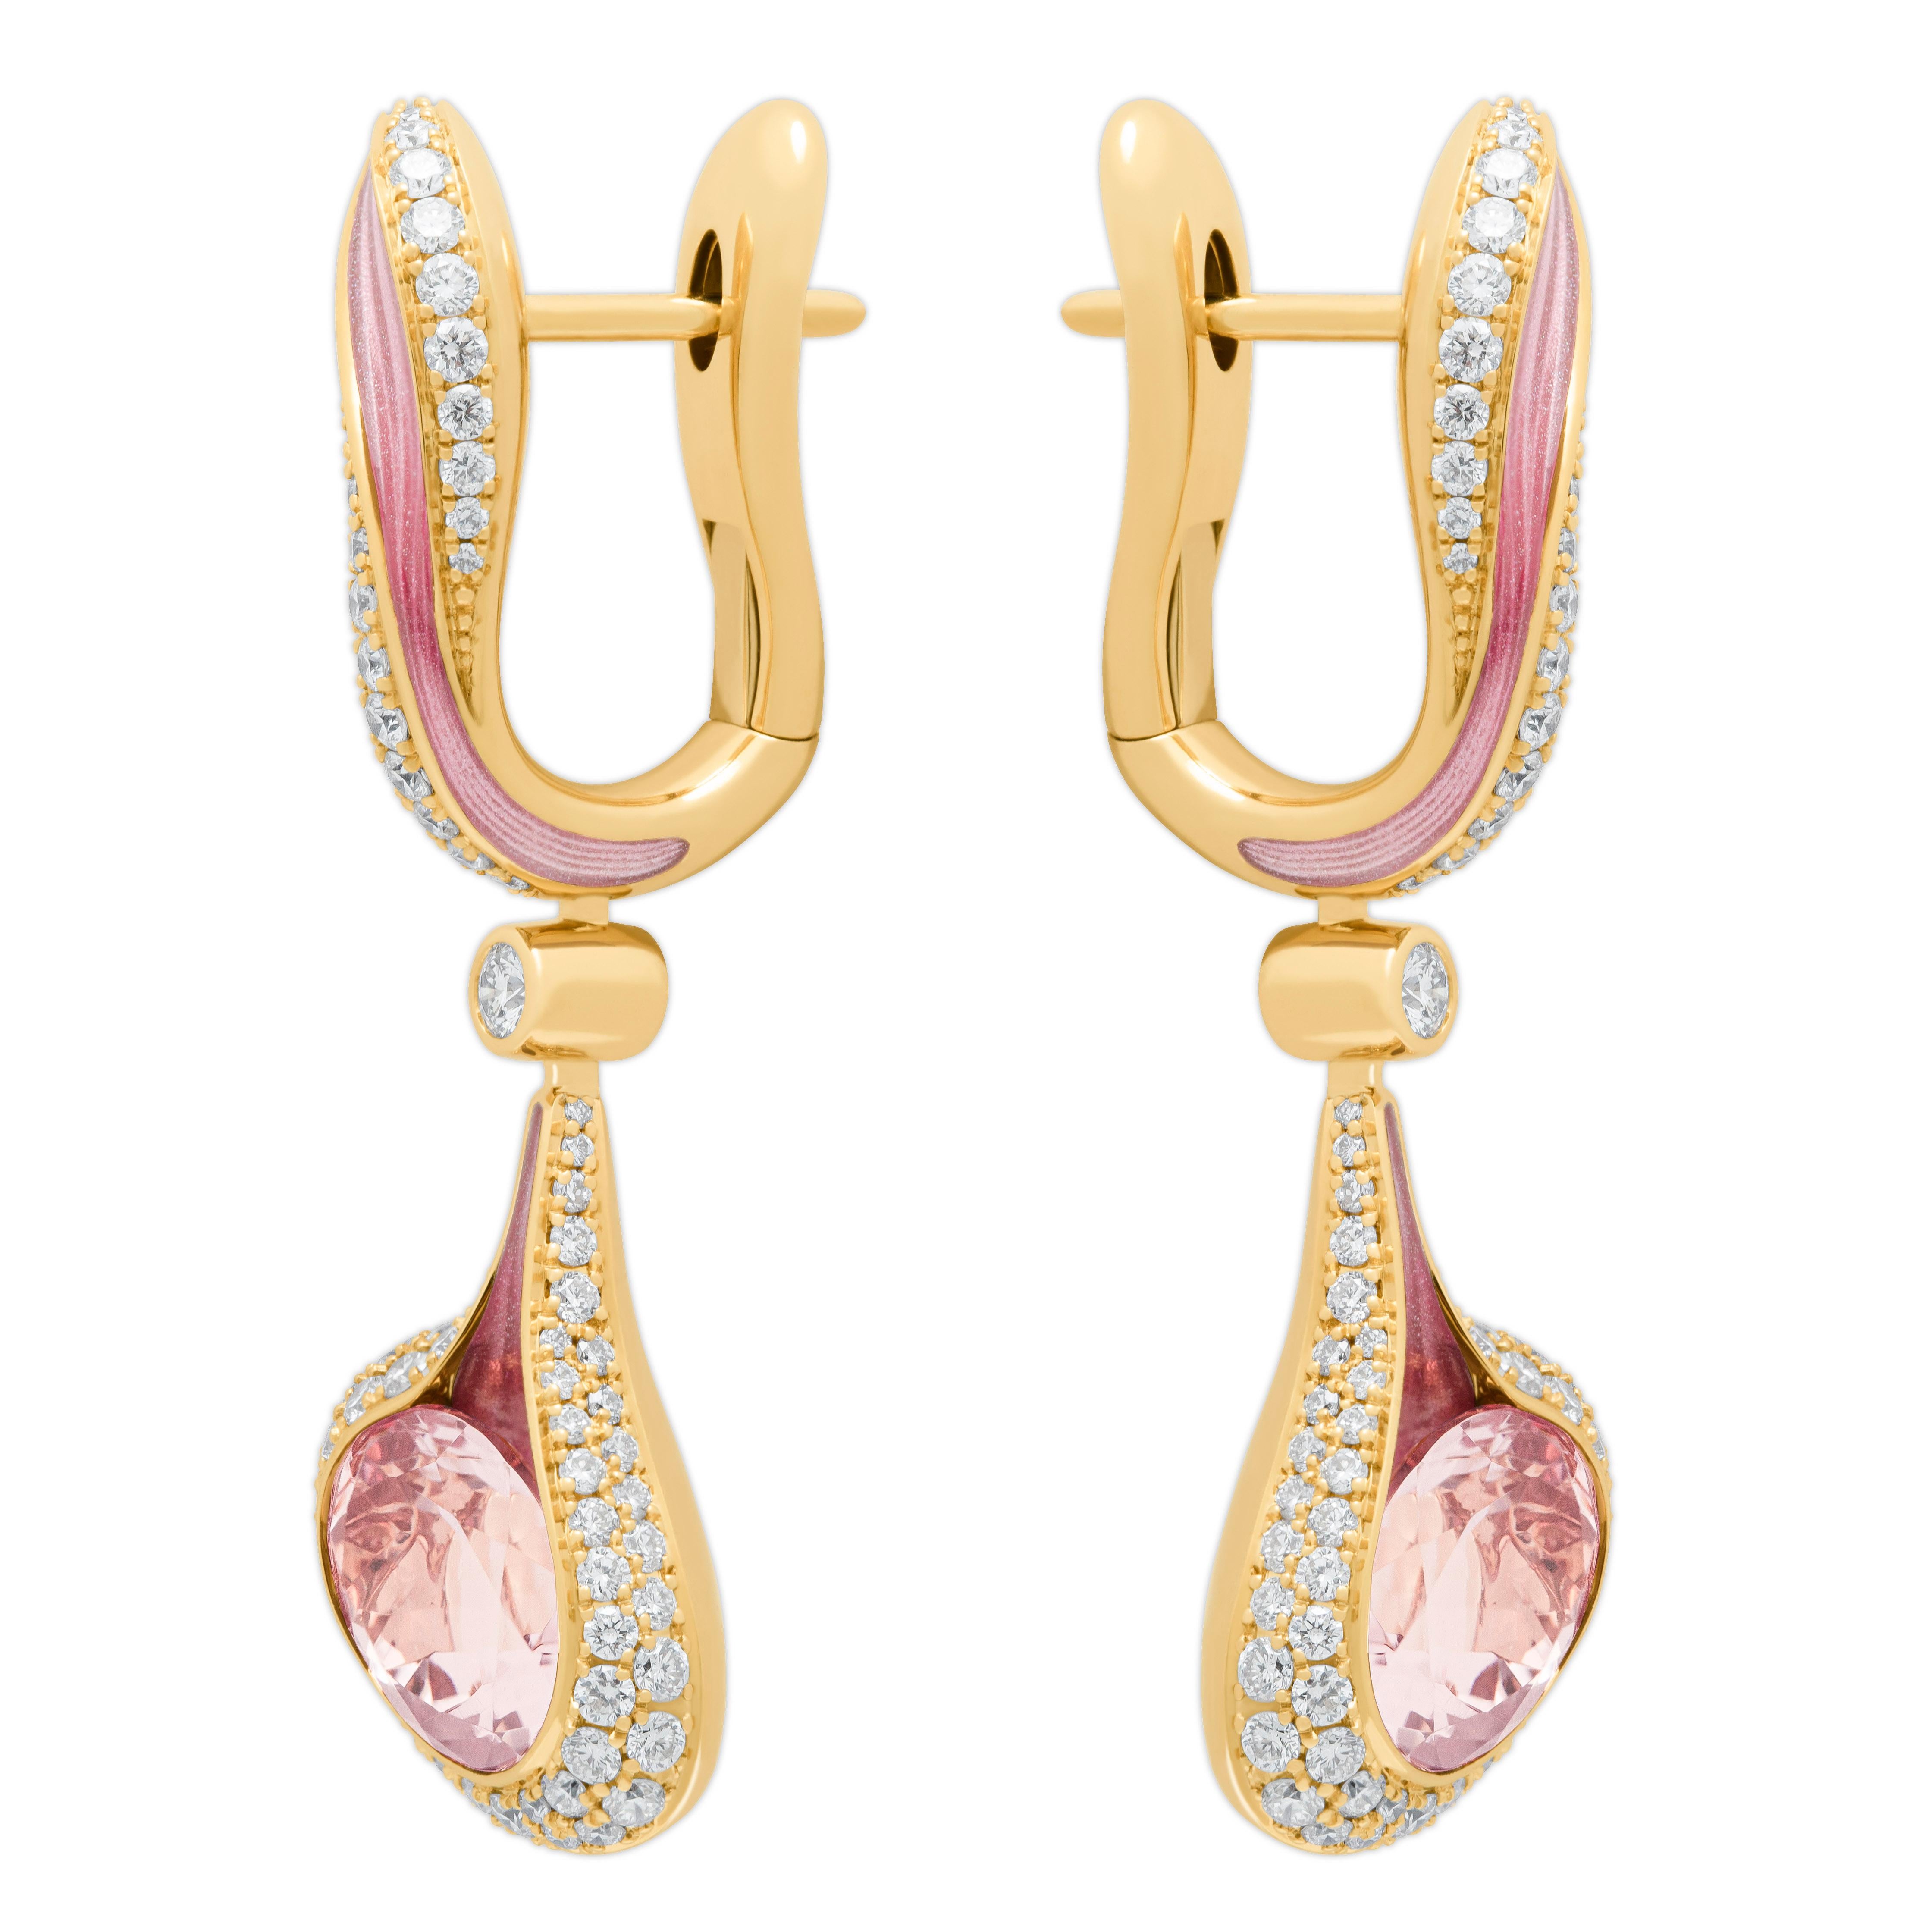 Morganite 3.68 Carat Diamonds Enamel 18 Karat Yellow Gold Melted Colors Earrings

Introducing our new Earrings from so popular Melted Colors Collection. This collection is filled with all the colors of the rainbow. All stones are perfectly matched